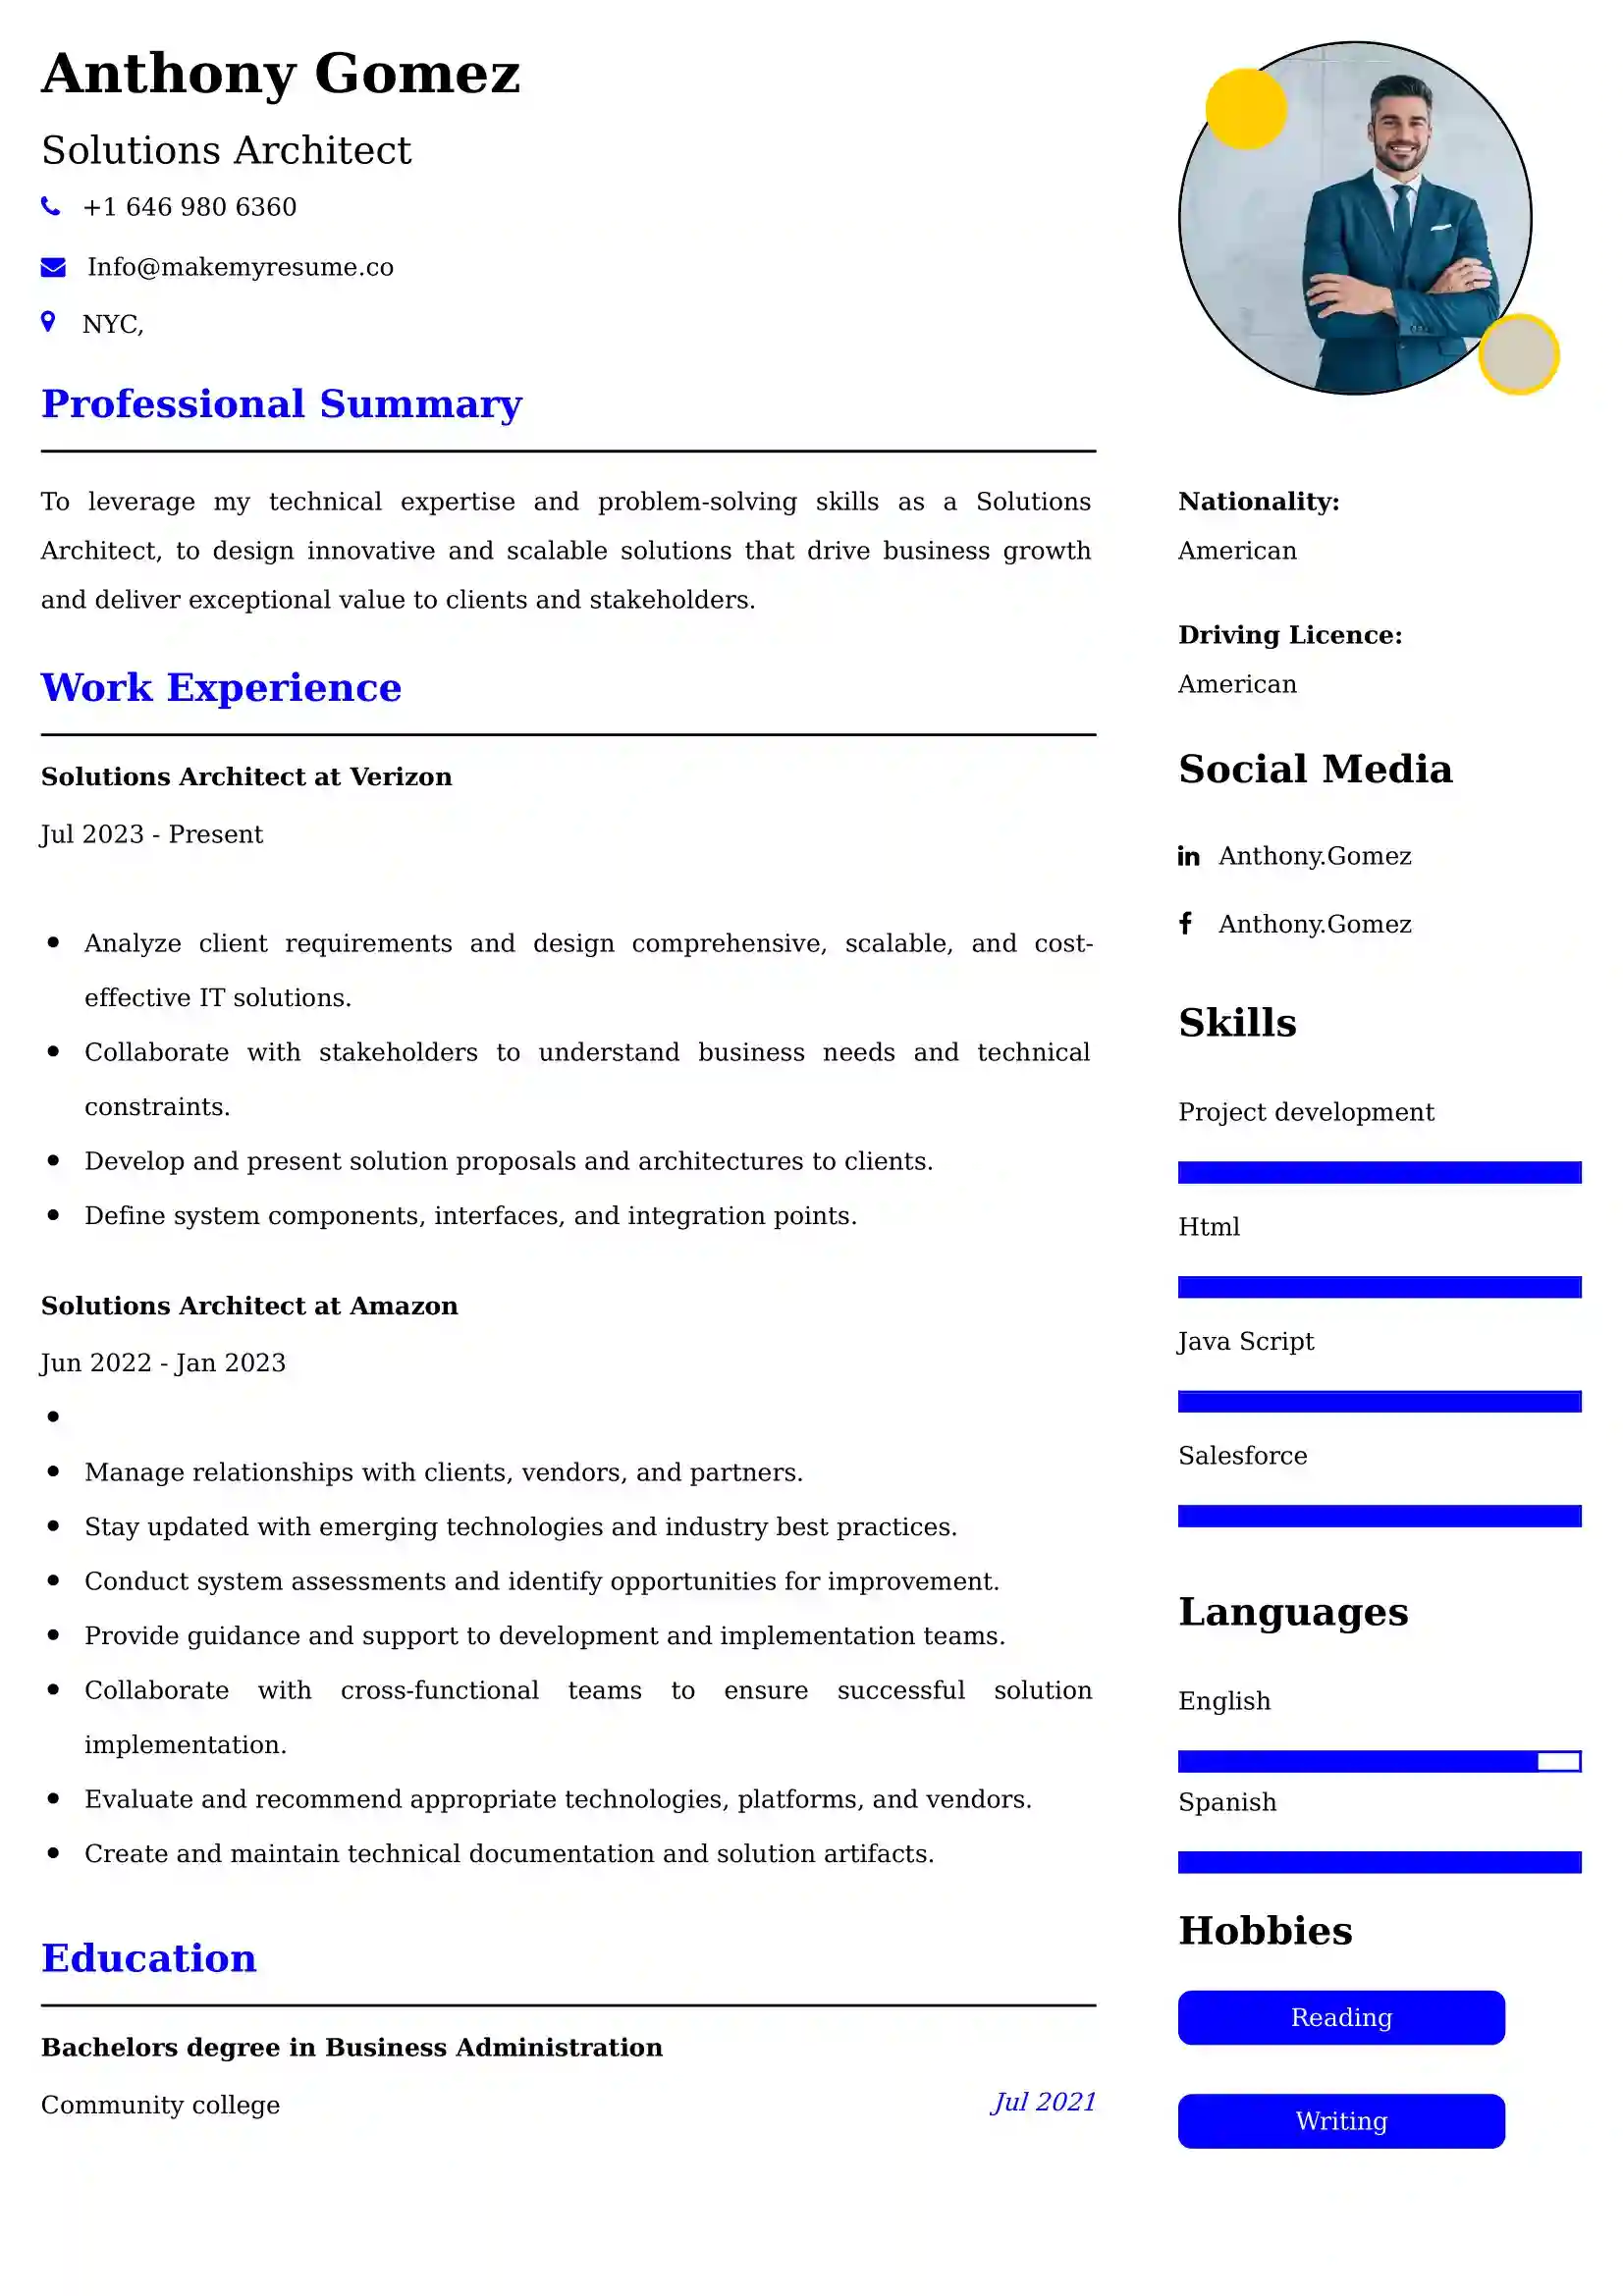 Solutions Architect Resume Examples - Brazilian Format, Latest Template